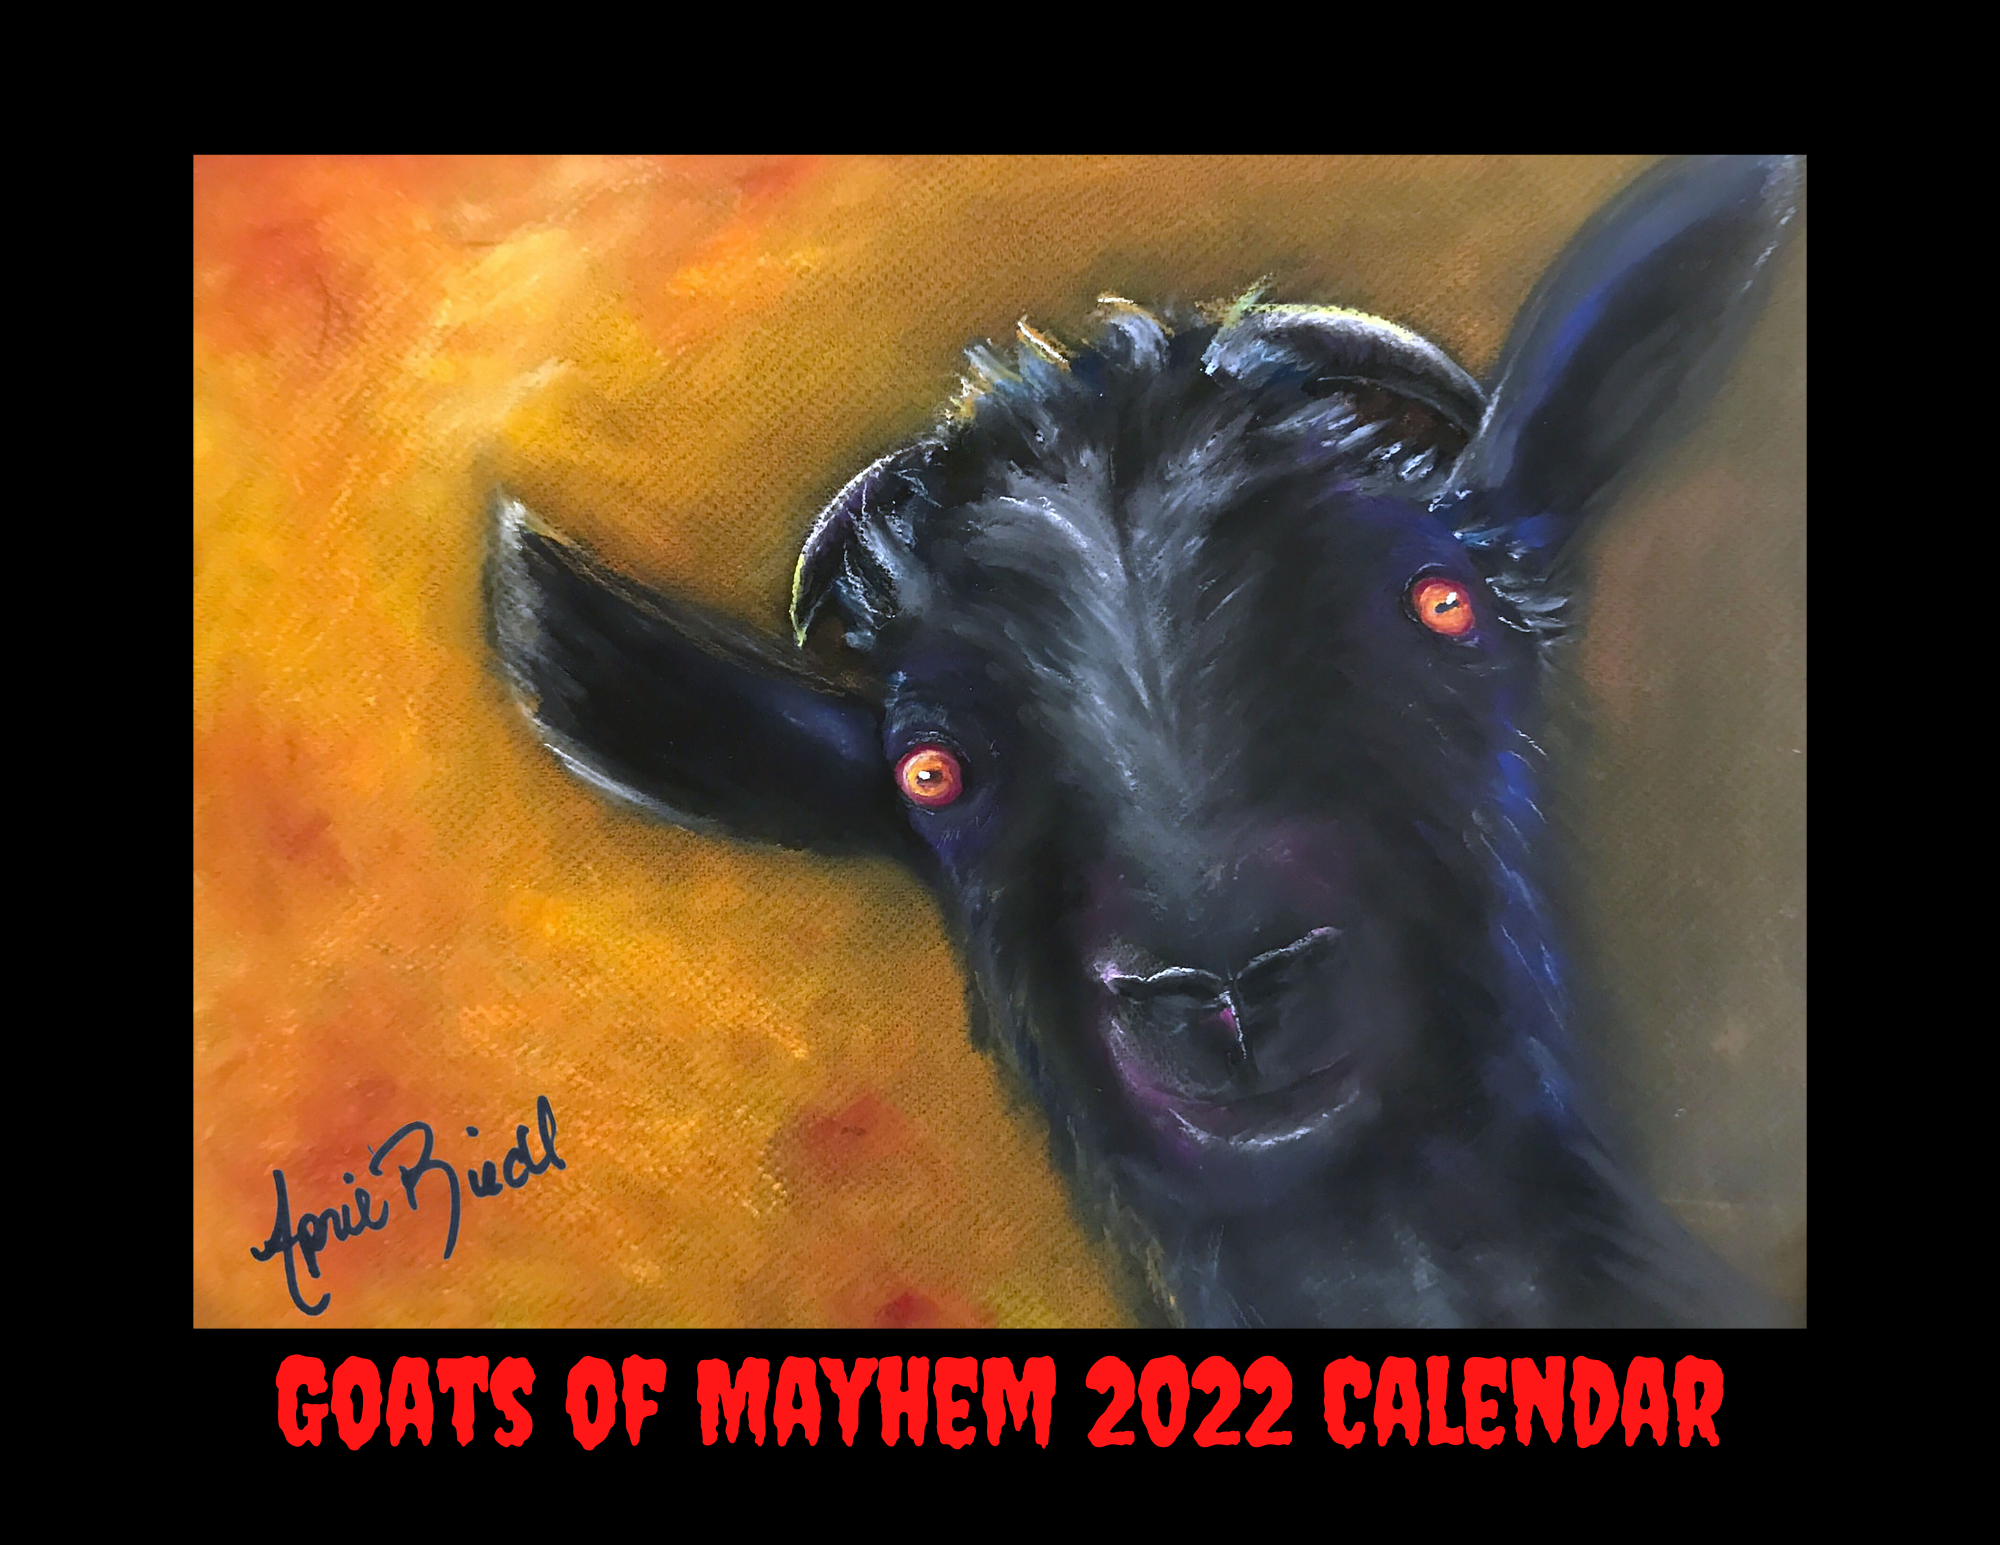 Thirteen images of goats creating mayhem drawn with soft pastels.